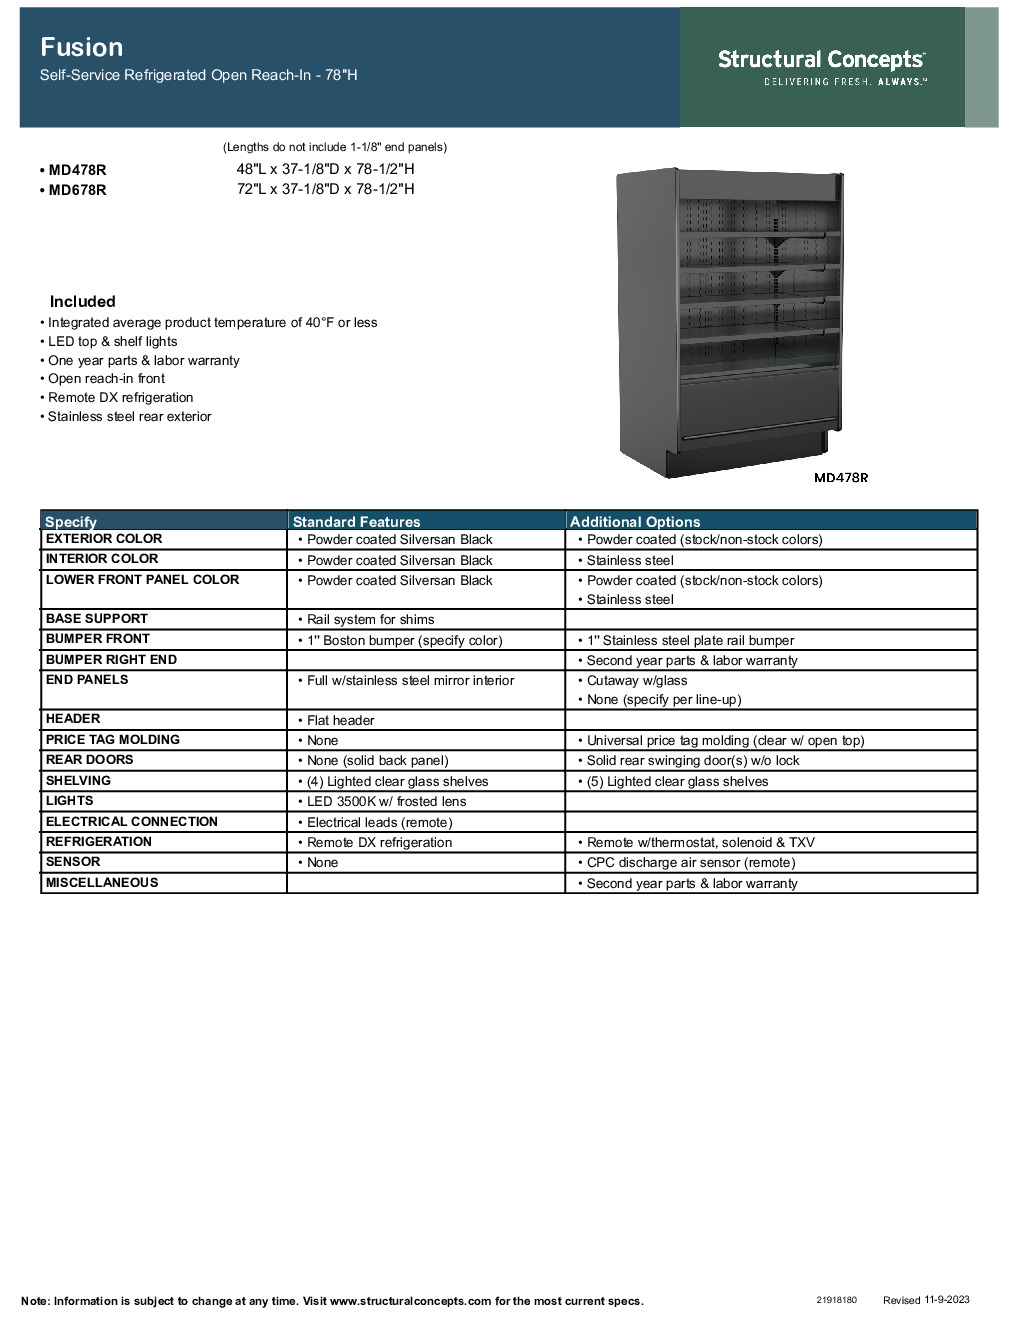 Structural Concepts MD678R Self-Serve Refrigerated Display Case